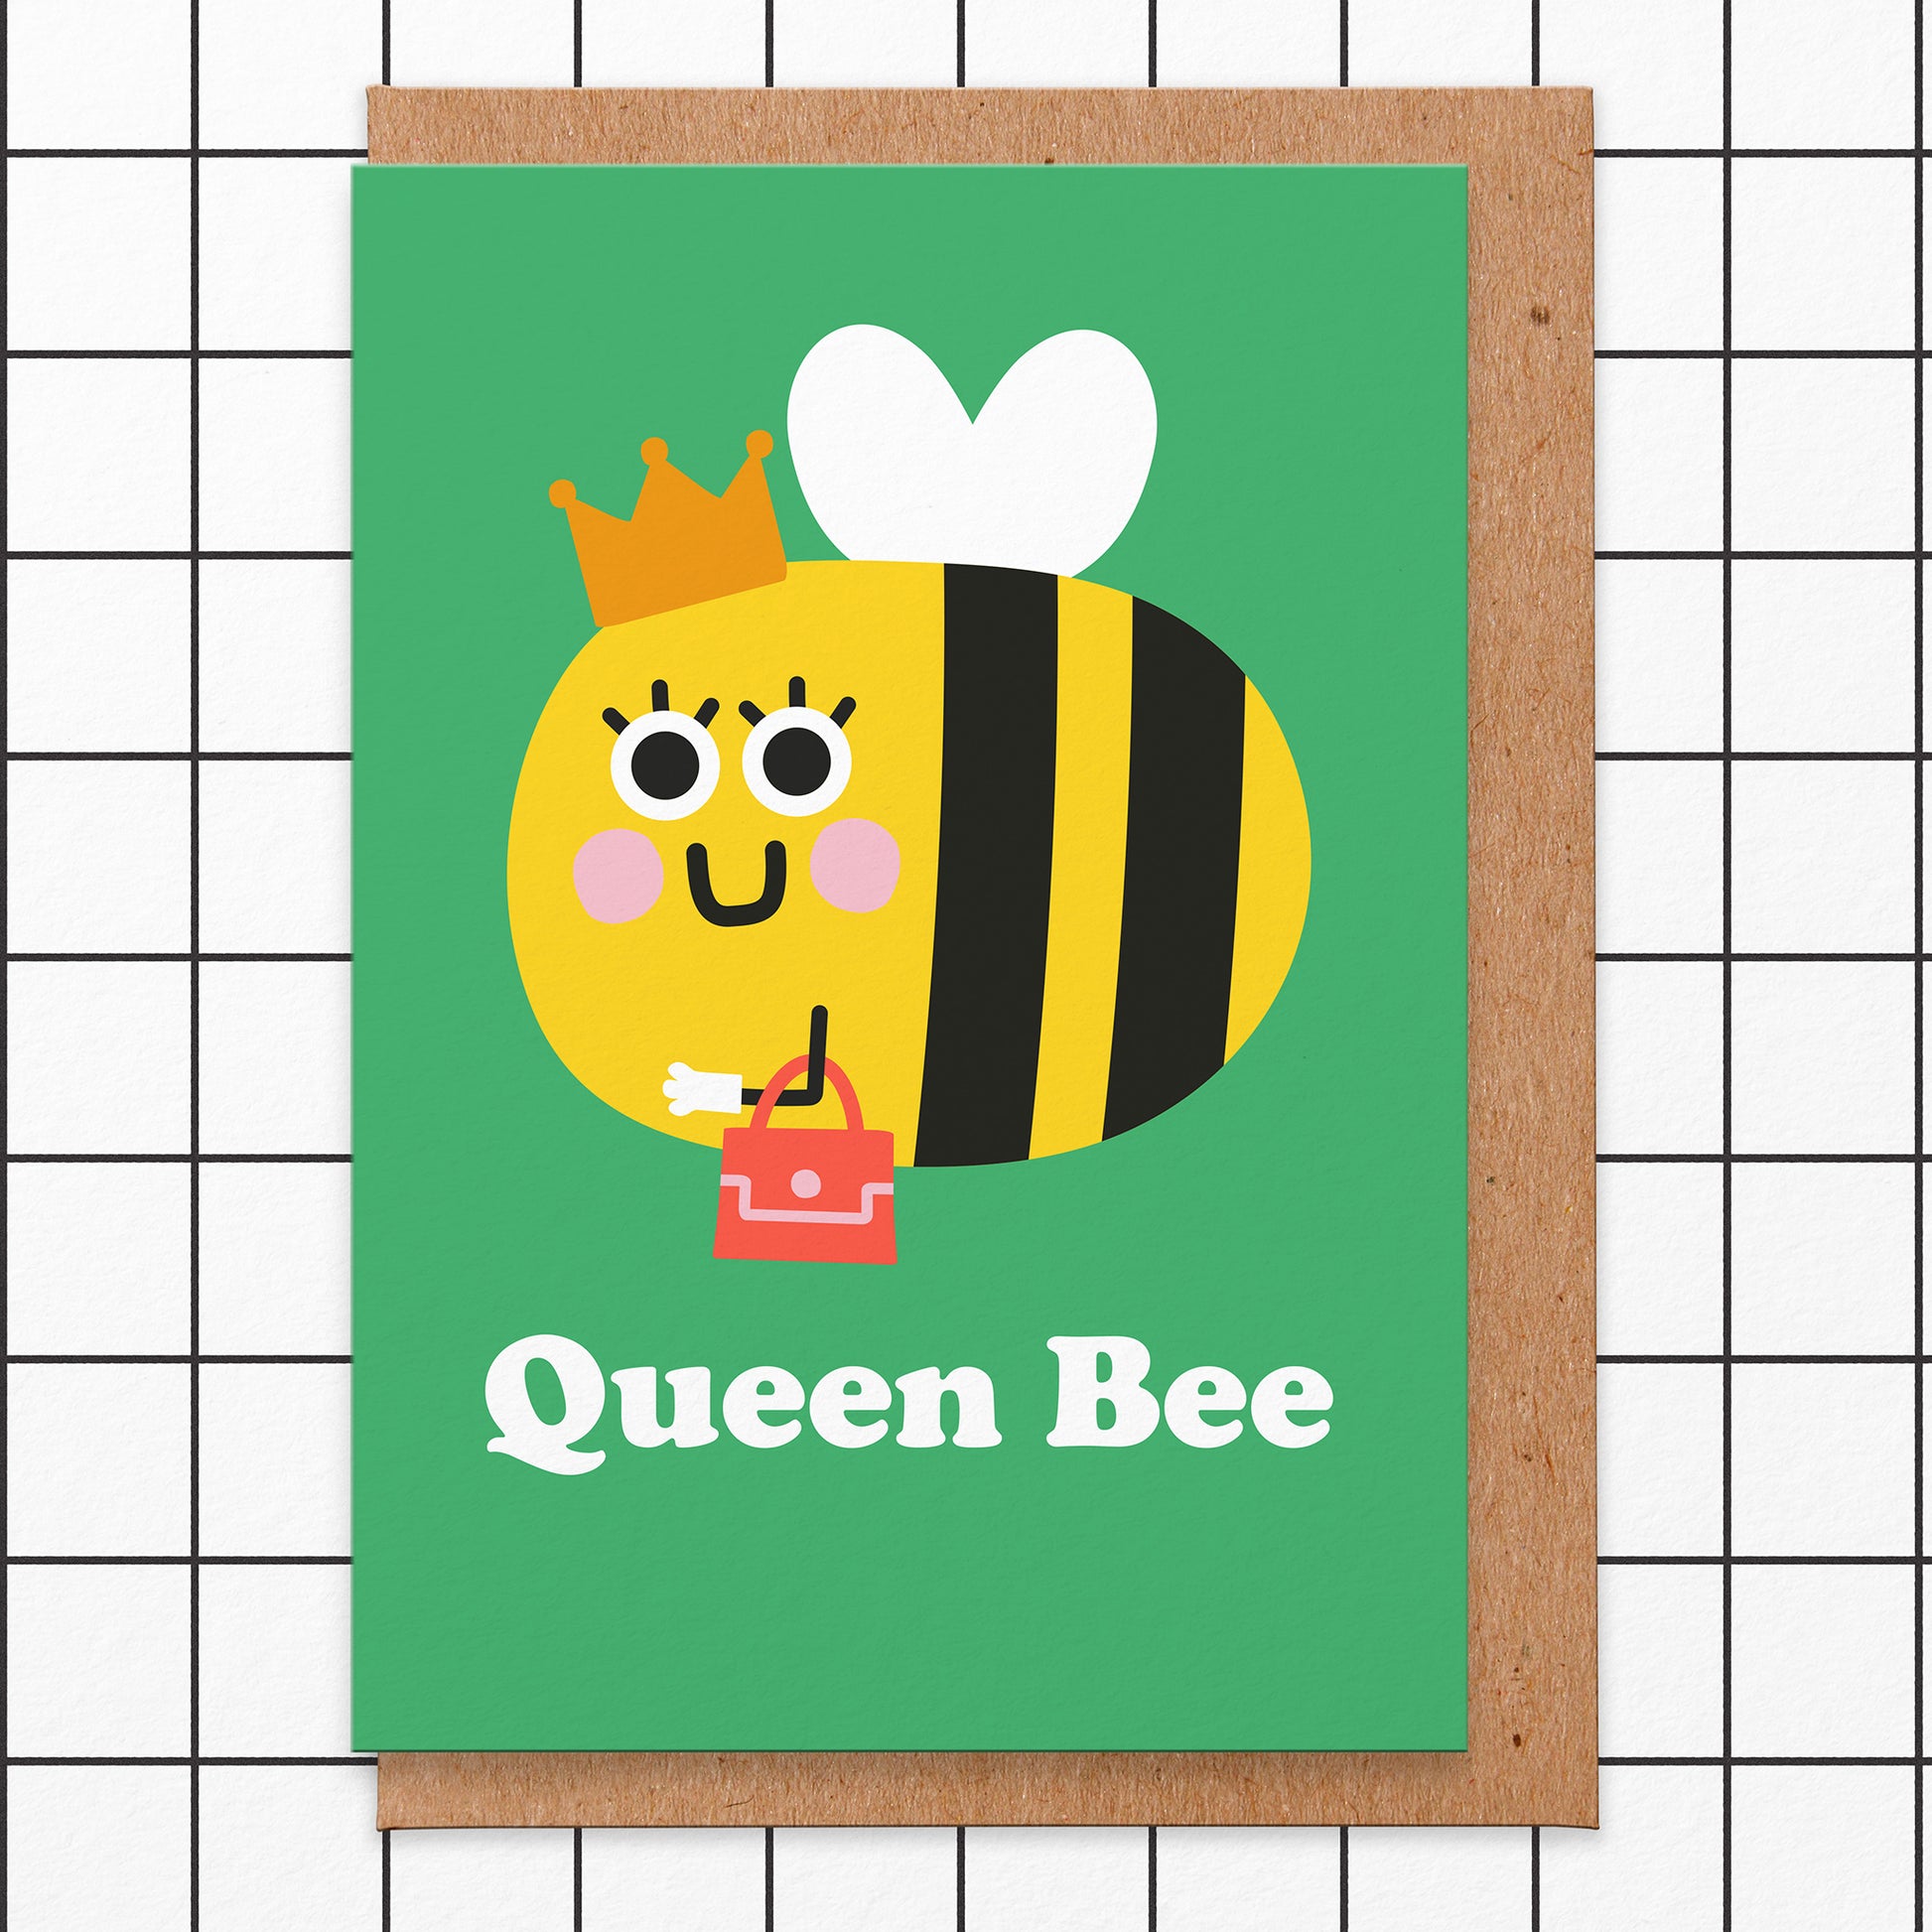 Greetings card that has an illustration of a smiling Bee with a crown  & handbag and says Queen Bee